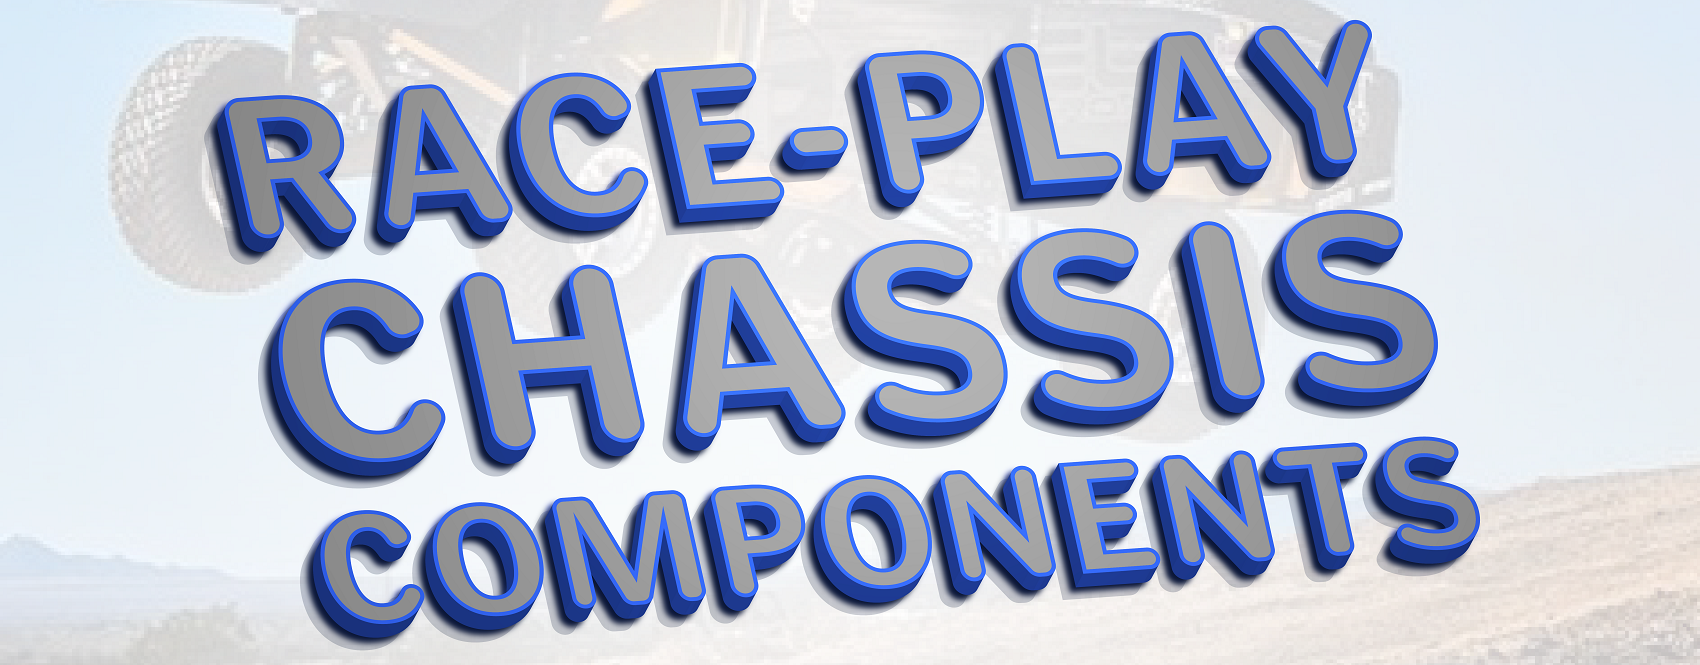 Race/Play Chassis Components